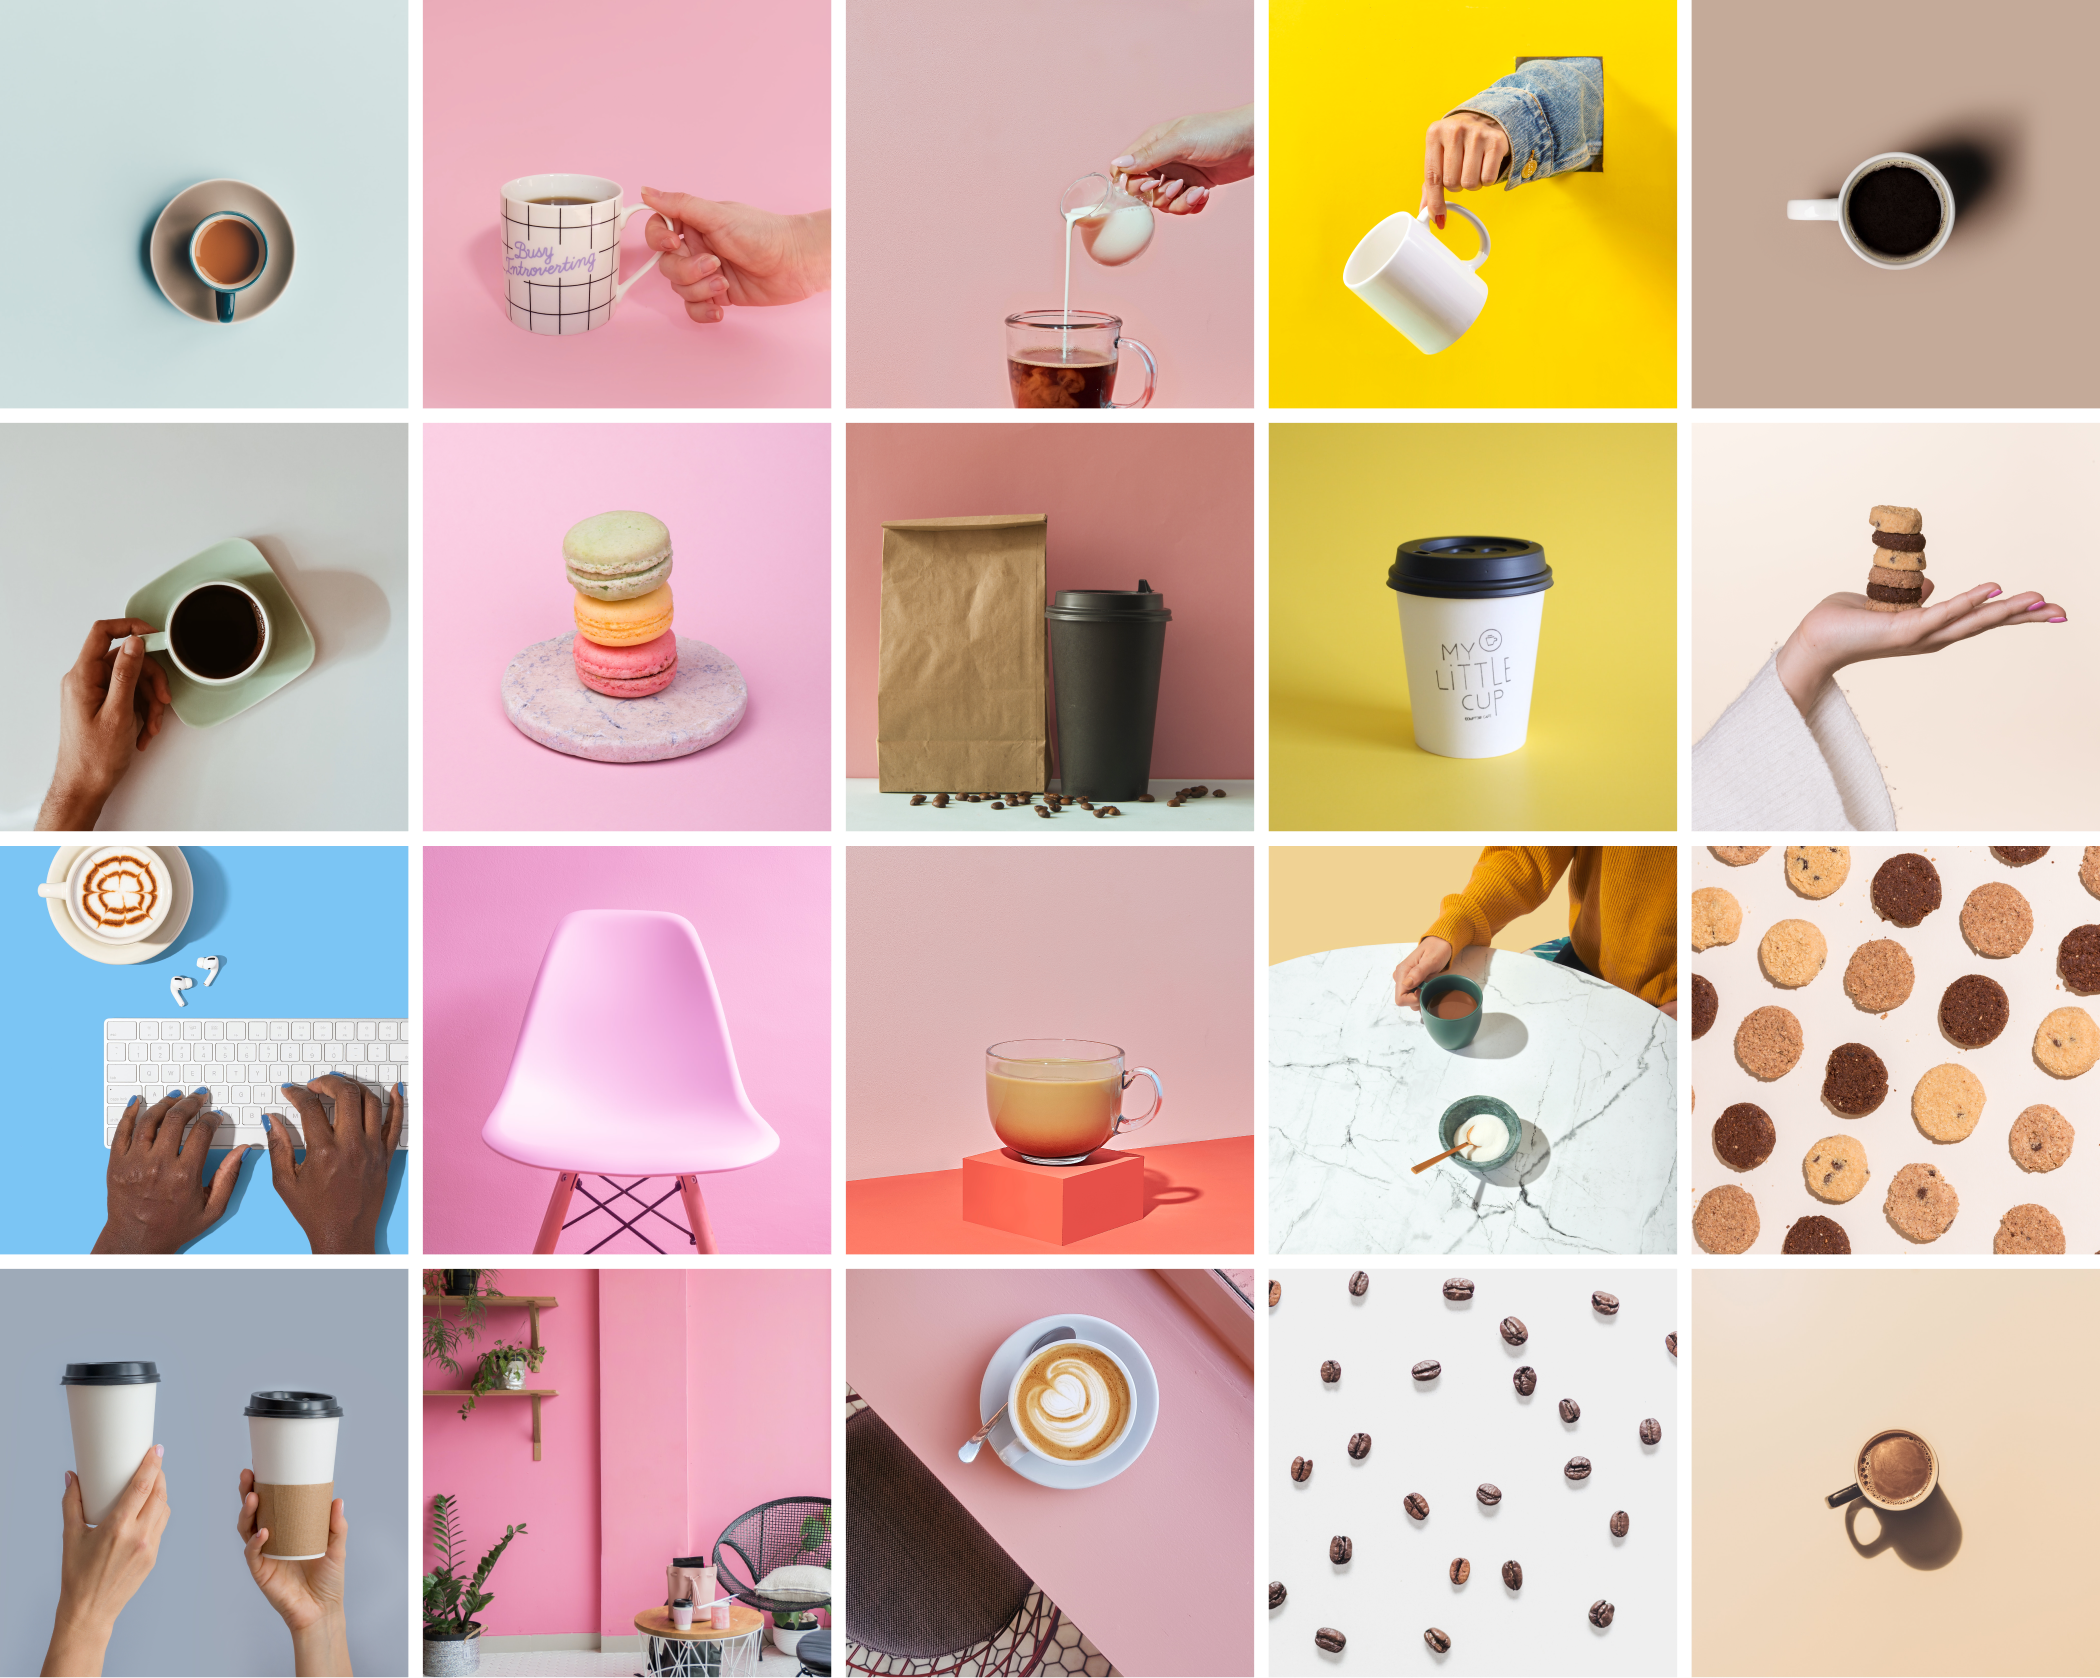 Imagery examples from brand style guide